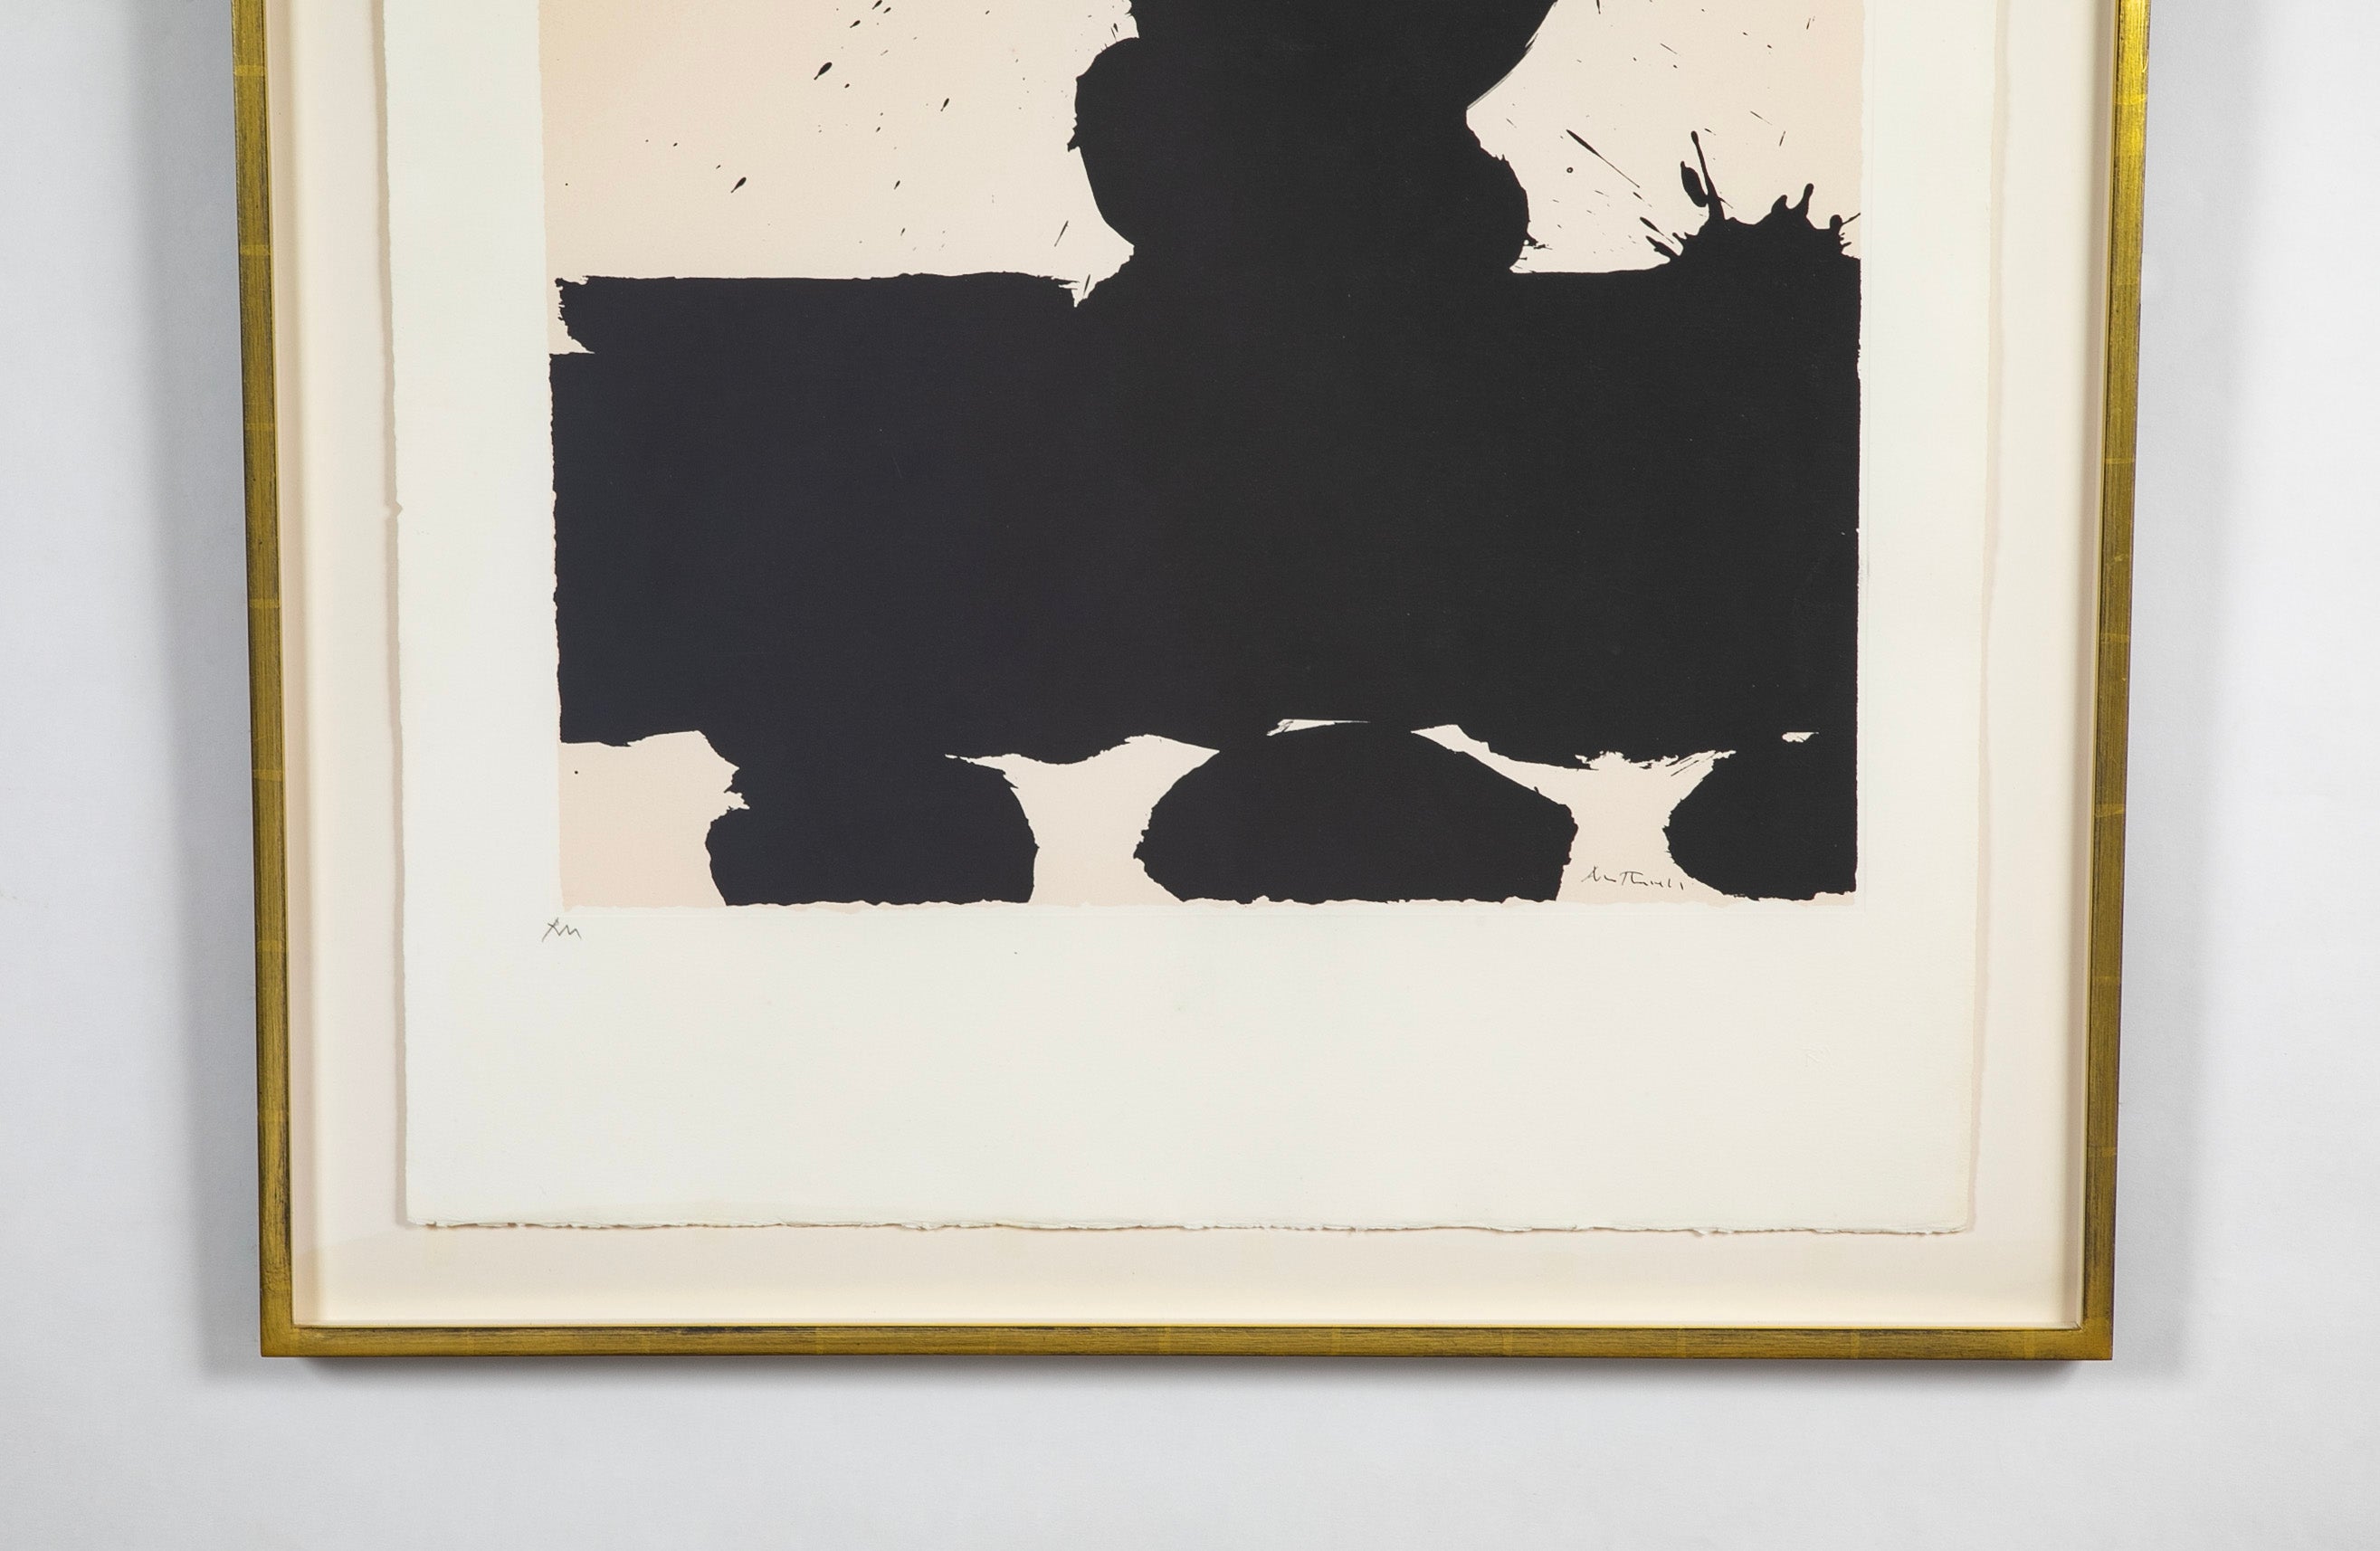 "Africa Suite 2"" by Robert Motherwell